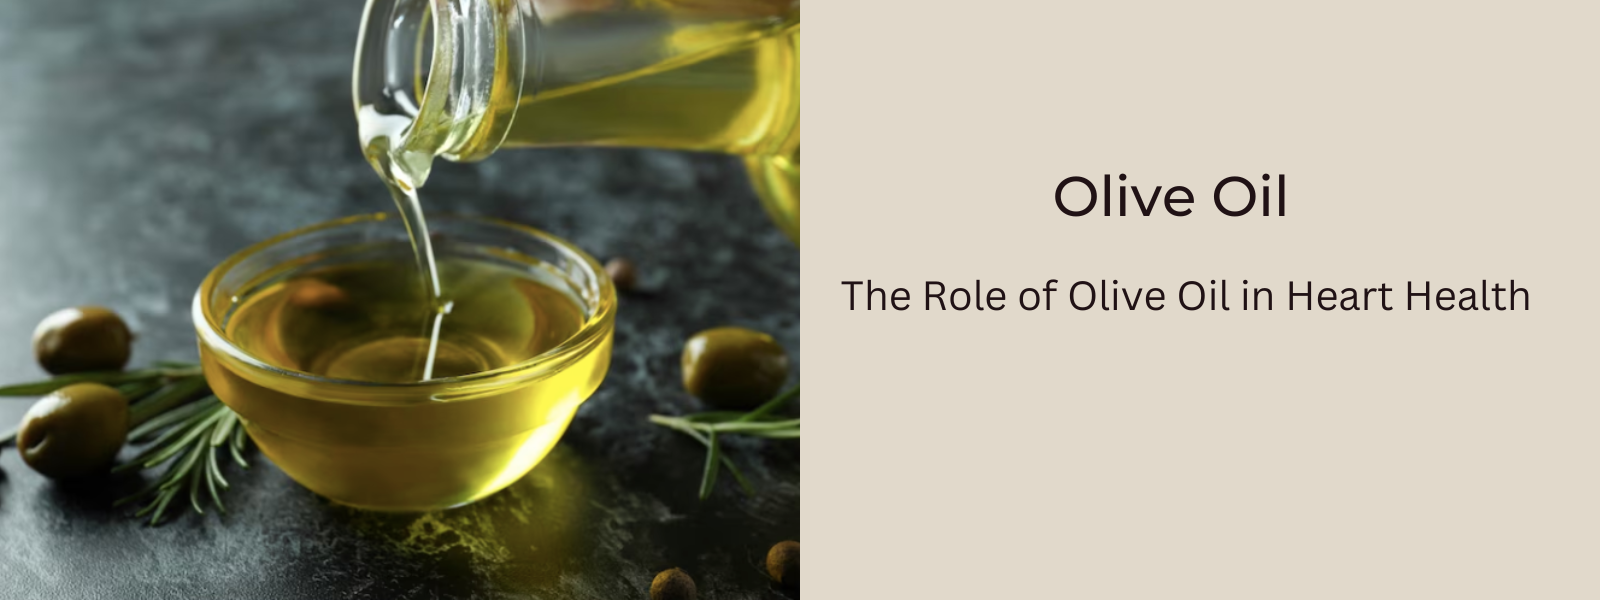 The Role of Olive Oil in Heart Health: A Mediterranean Perspective